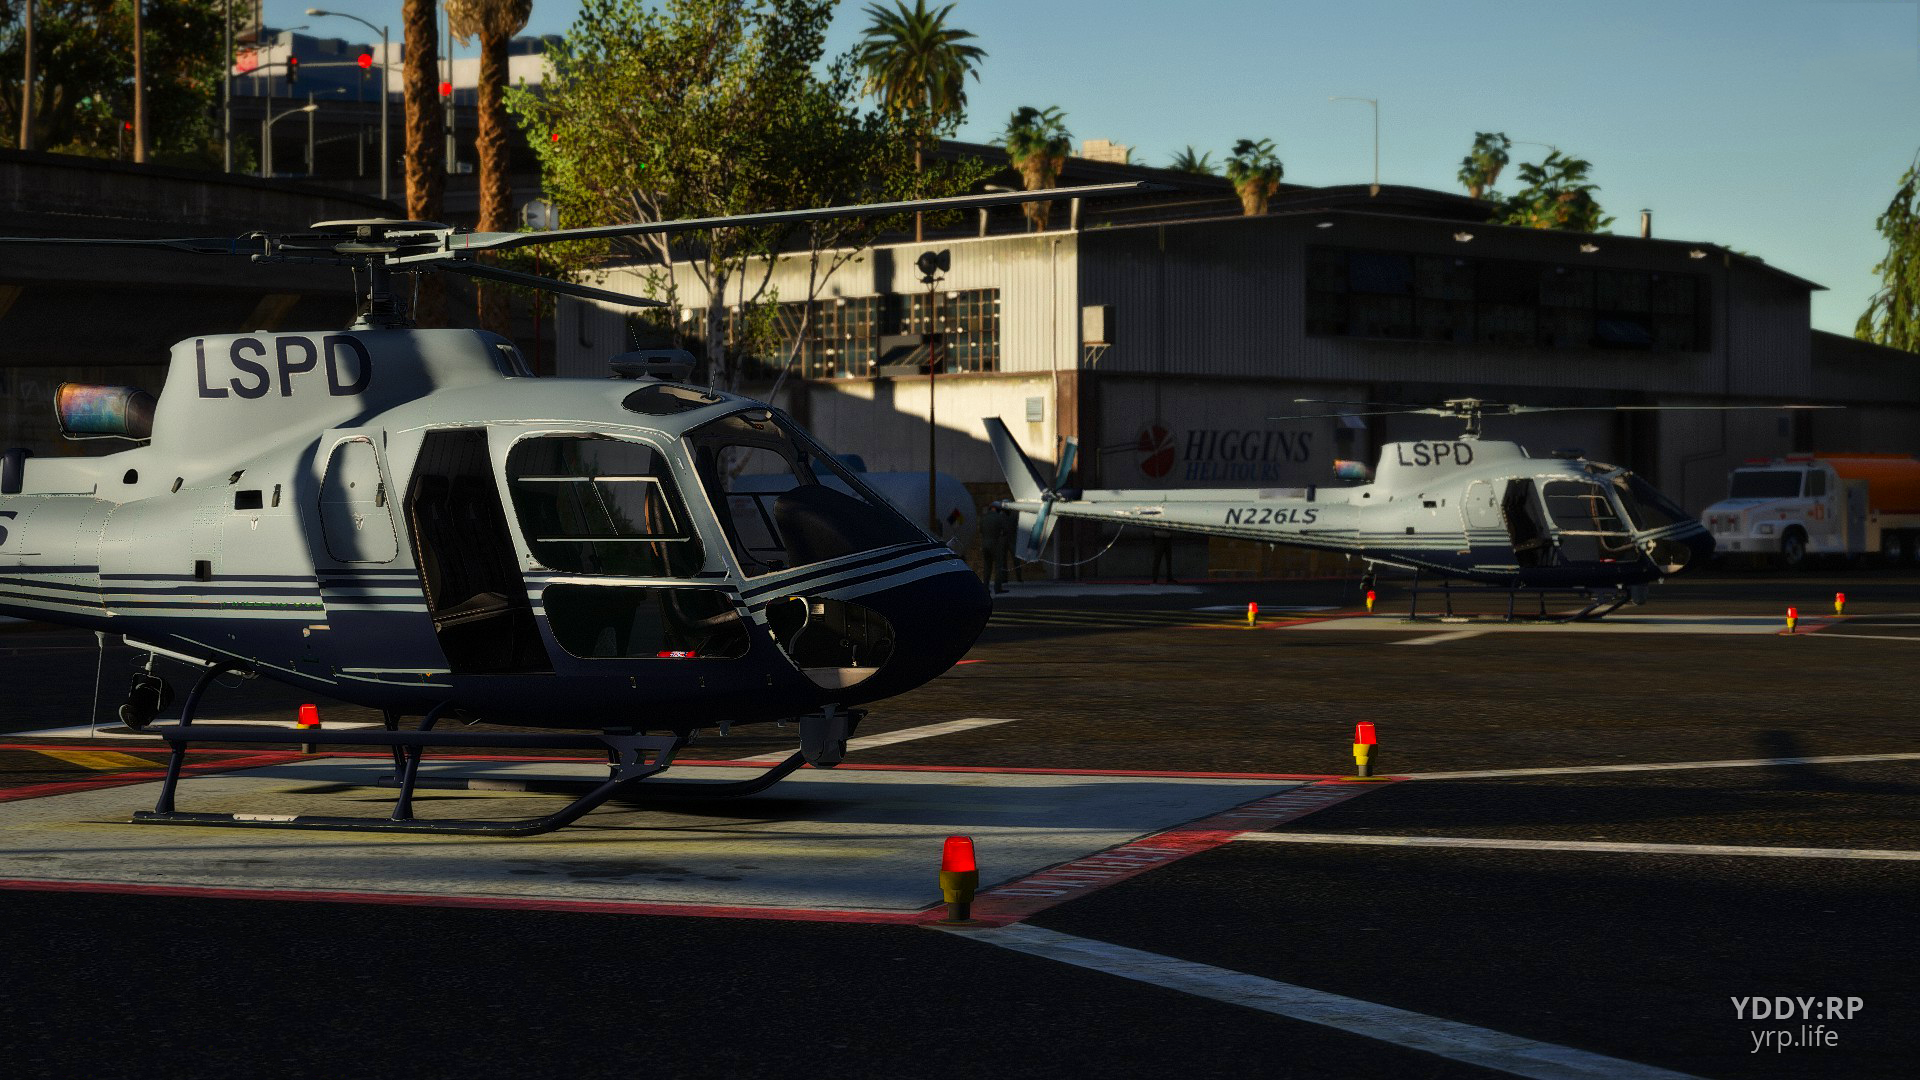 Air Support Unit LSPD